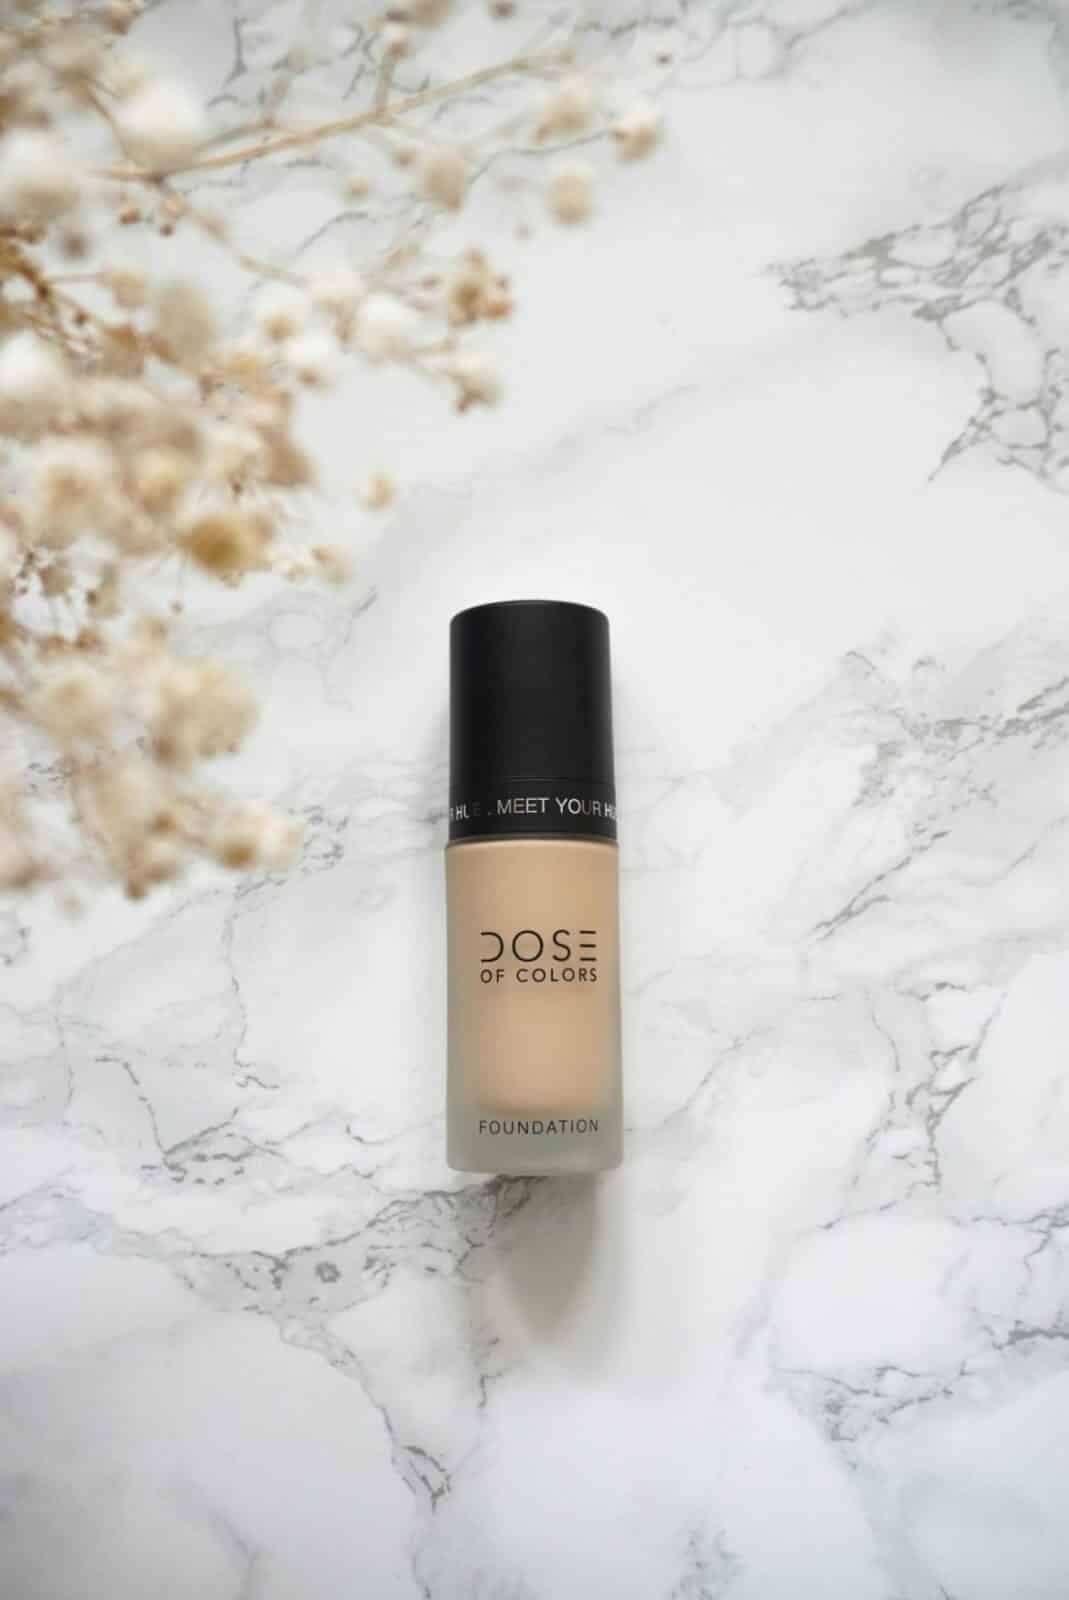 MEDIUM TO FULL COVERAGE MEET YOUR HUE DOSE OF COLORS FOUNDATION REVIEW